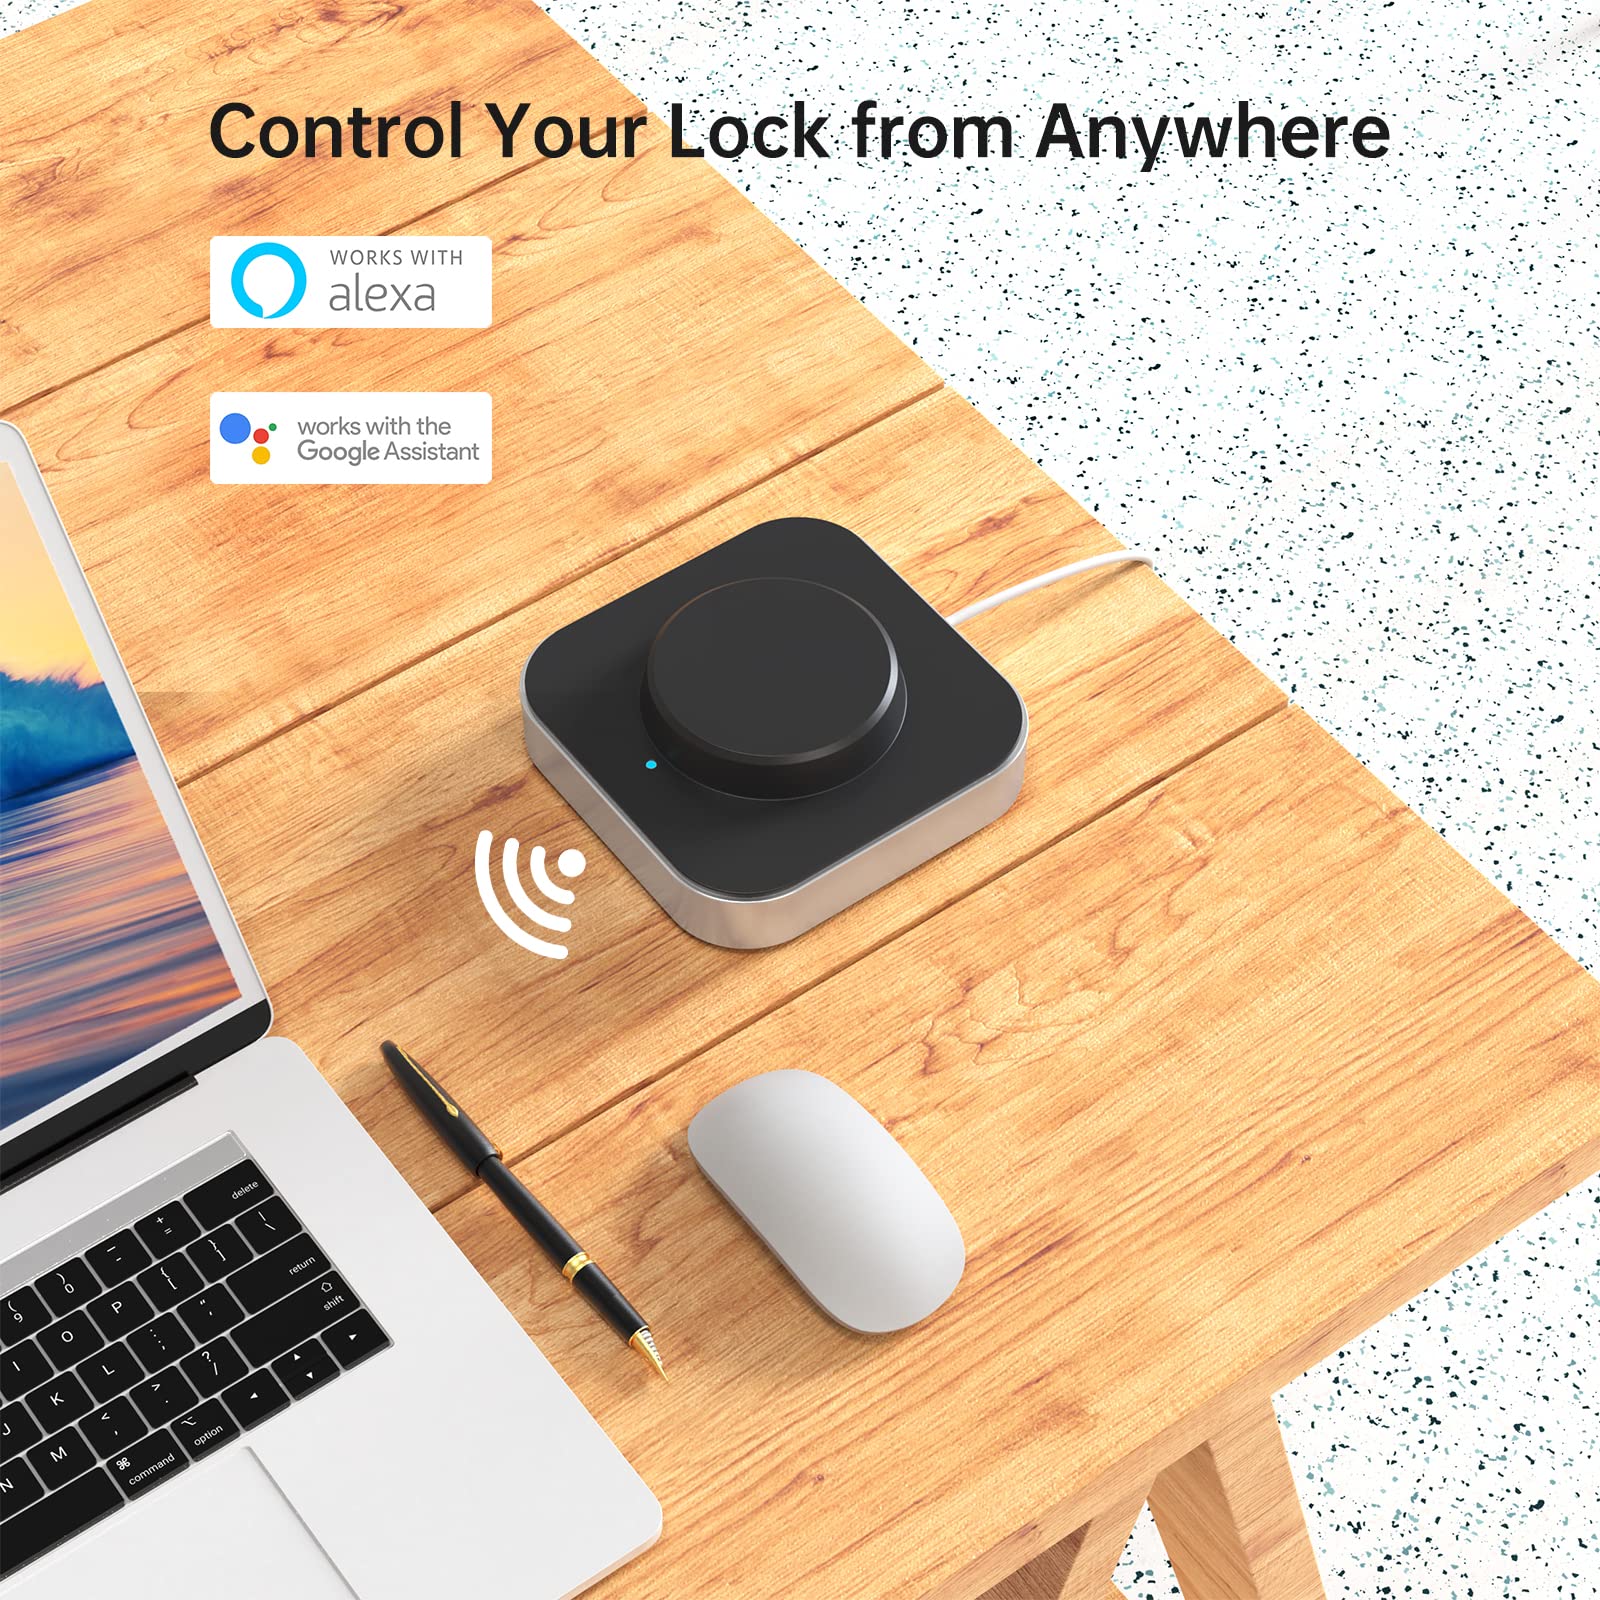 Control your lock from anywhere